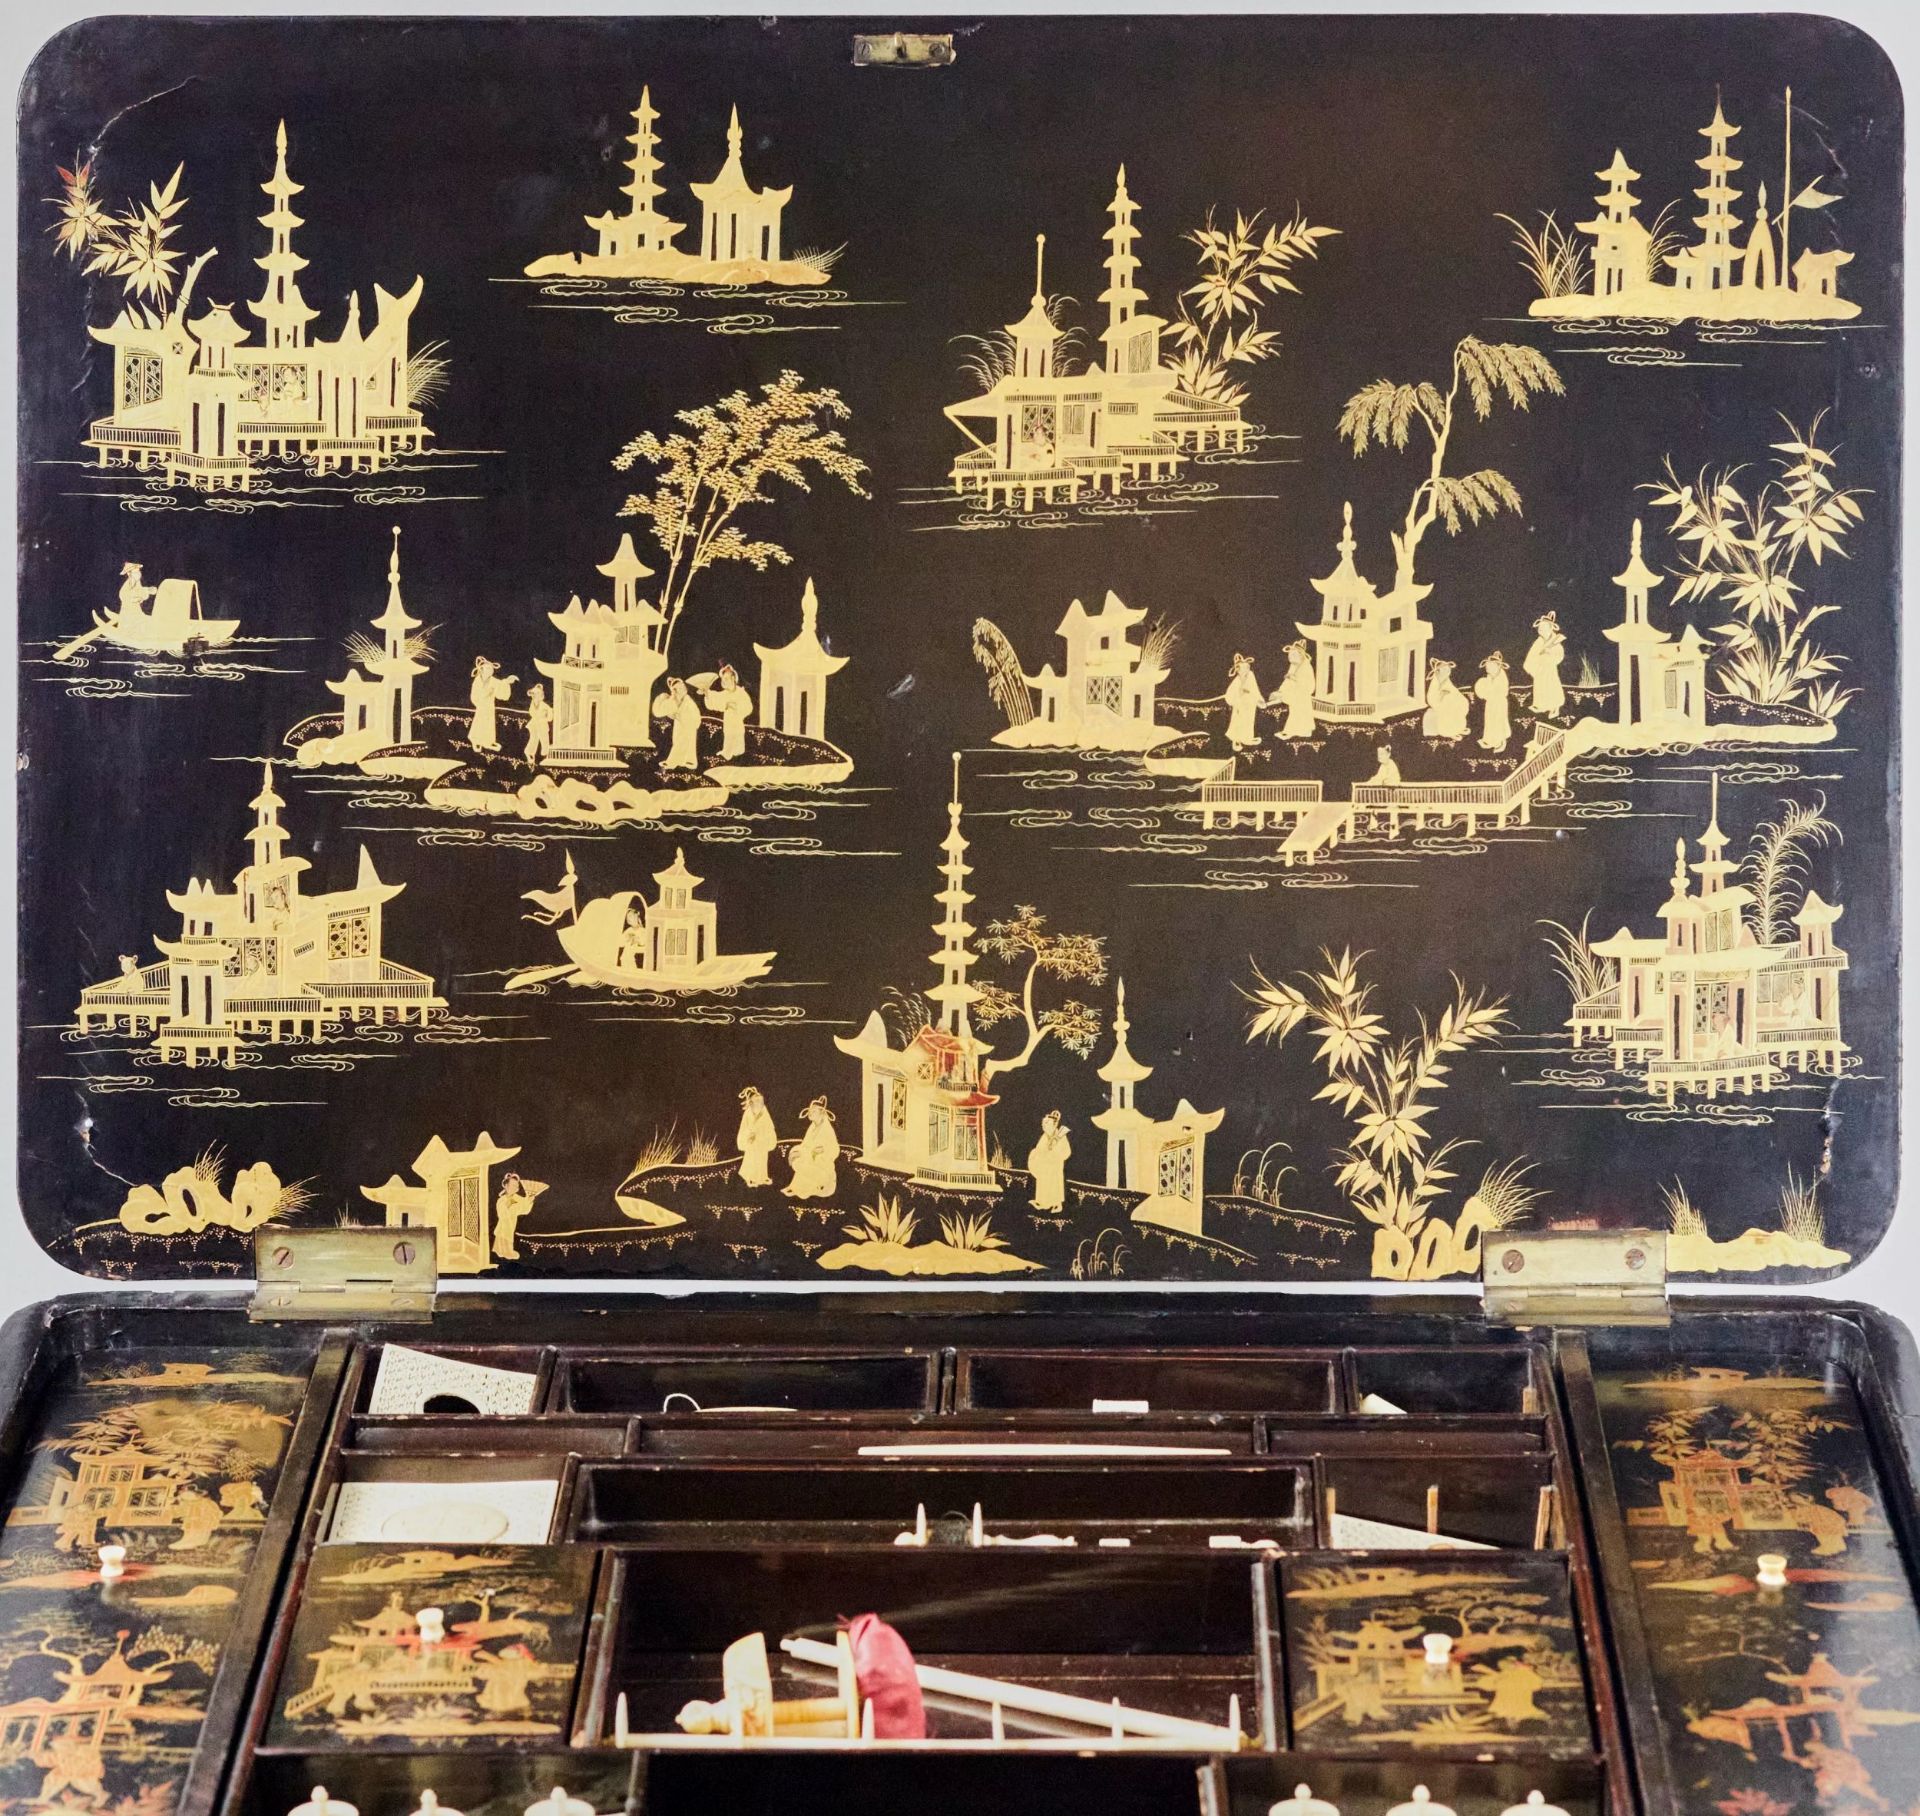 Needlework table made of black and gold Beijing lacquer. 19th century. - Image 11 of 11